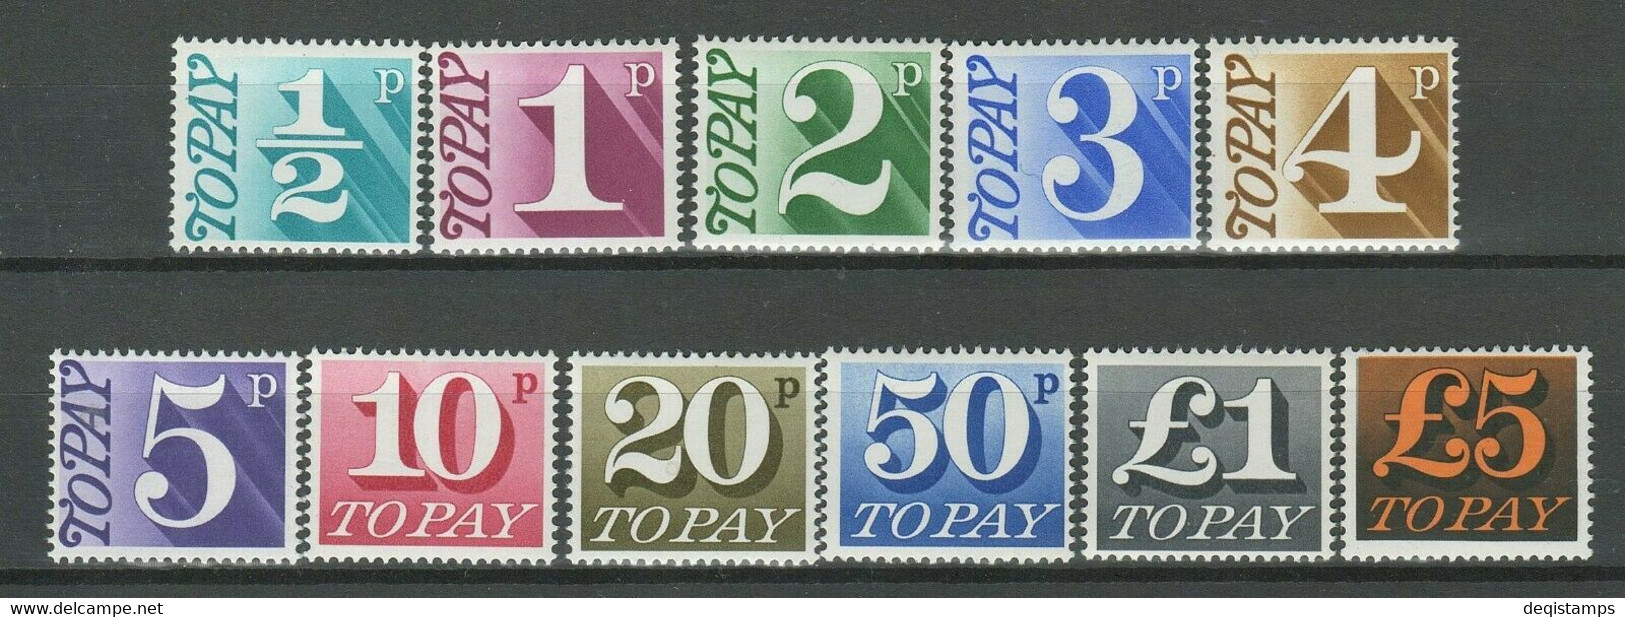 GB Postage Due Lot ☀ MNH/MH - Postage Due